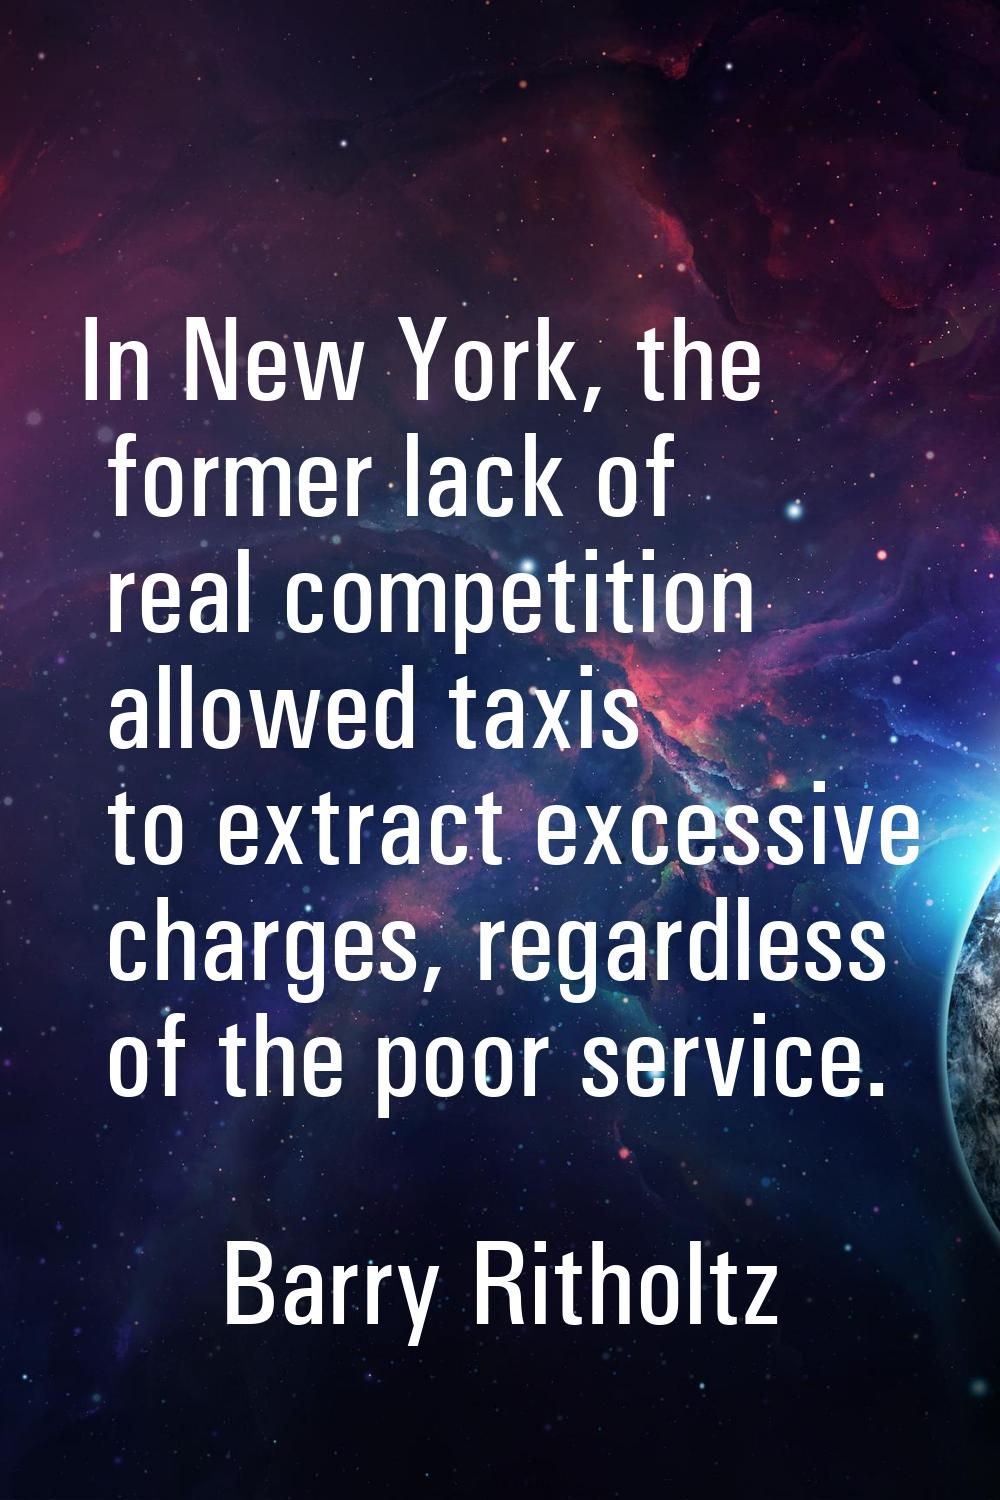 In New York, the former lack of real competition allowed taxis to extract excessive charges, regard